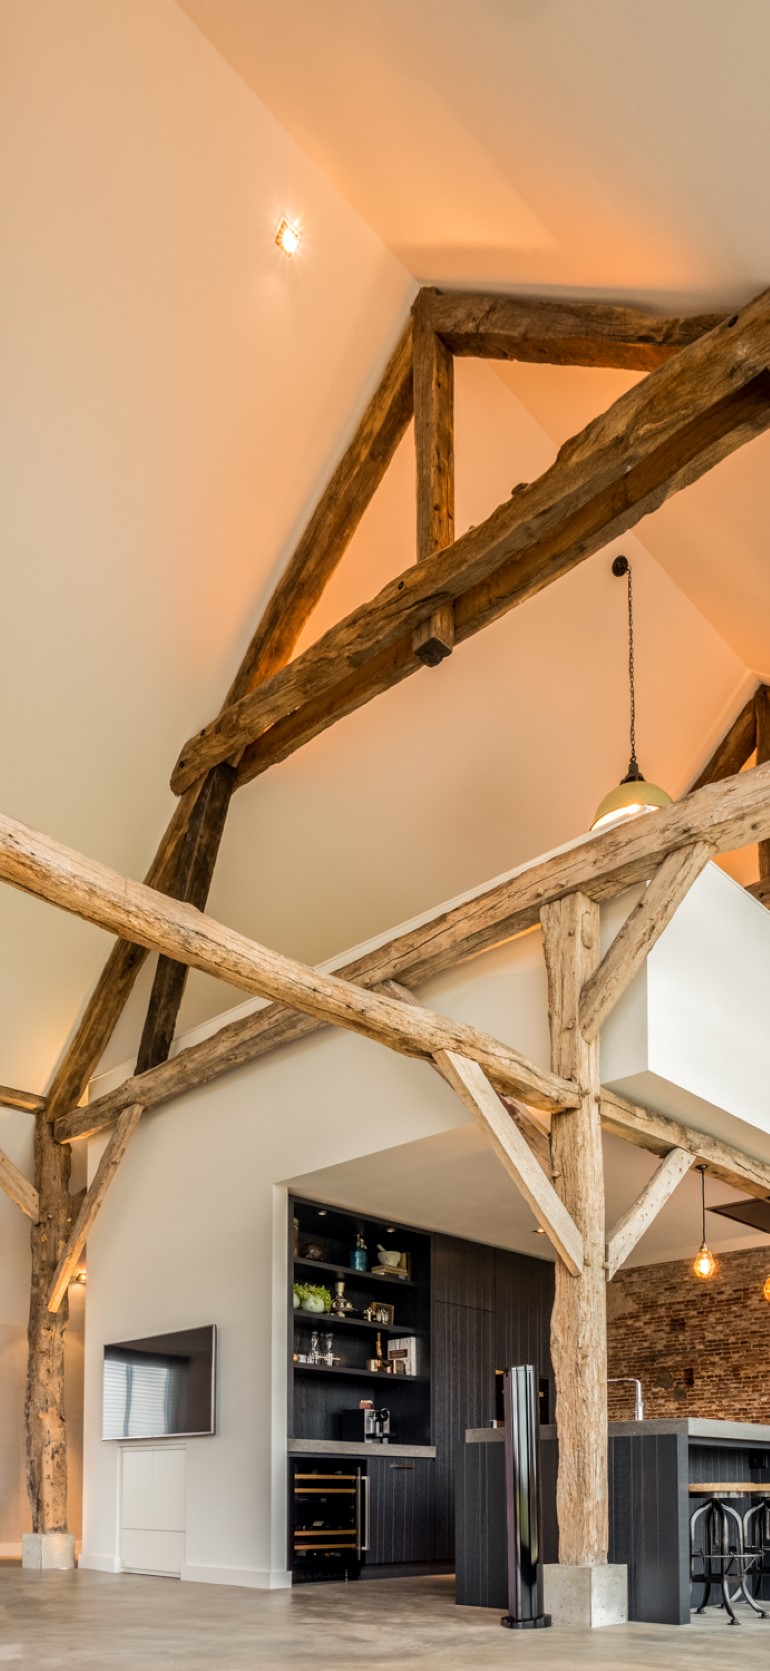 Old Dutch Farm Renovated with Preservation of Ancient Wooden Trusses (9)